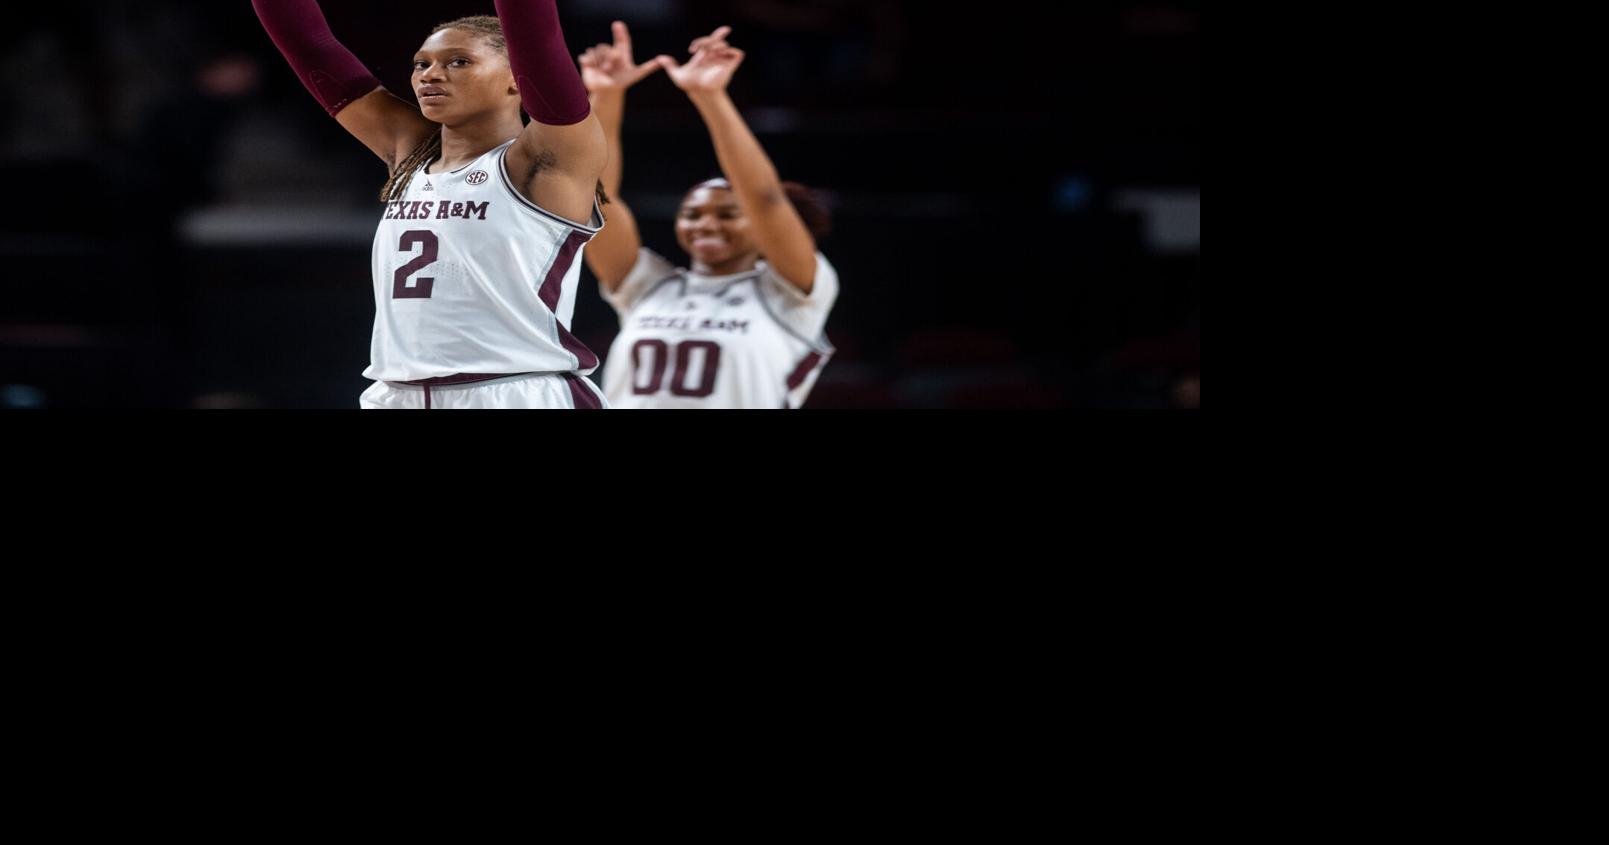 A&M women’s basketball team looks to repeat last year’s SEC tourney success